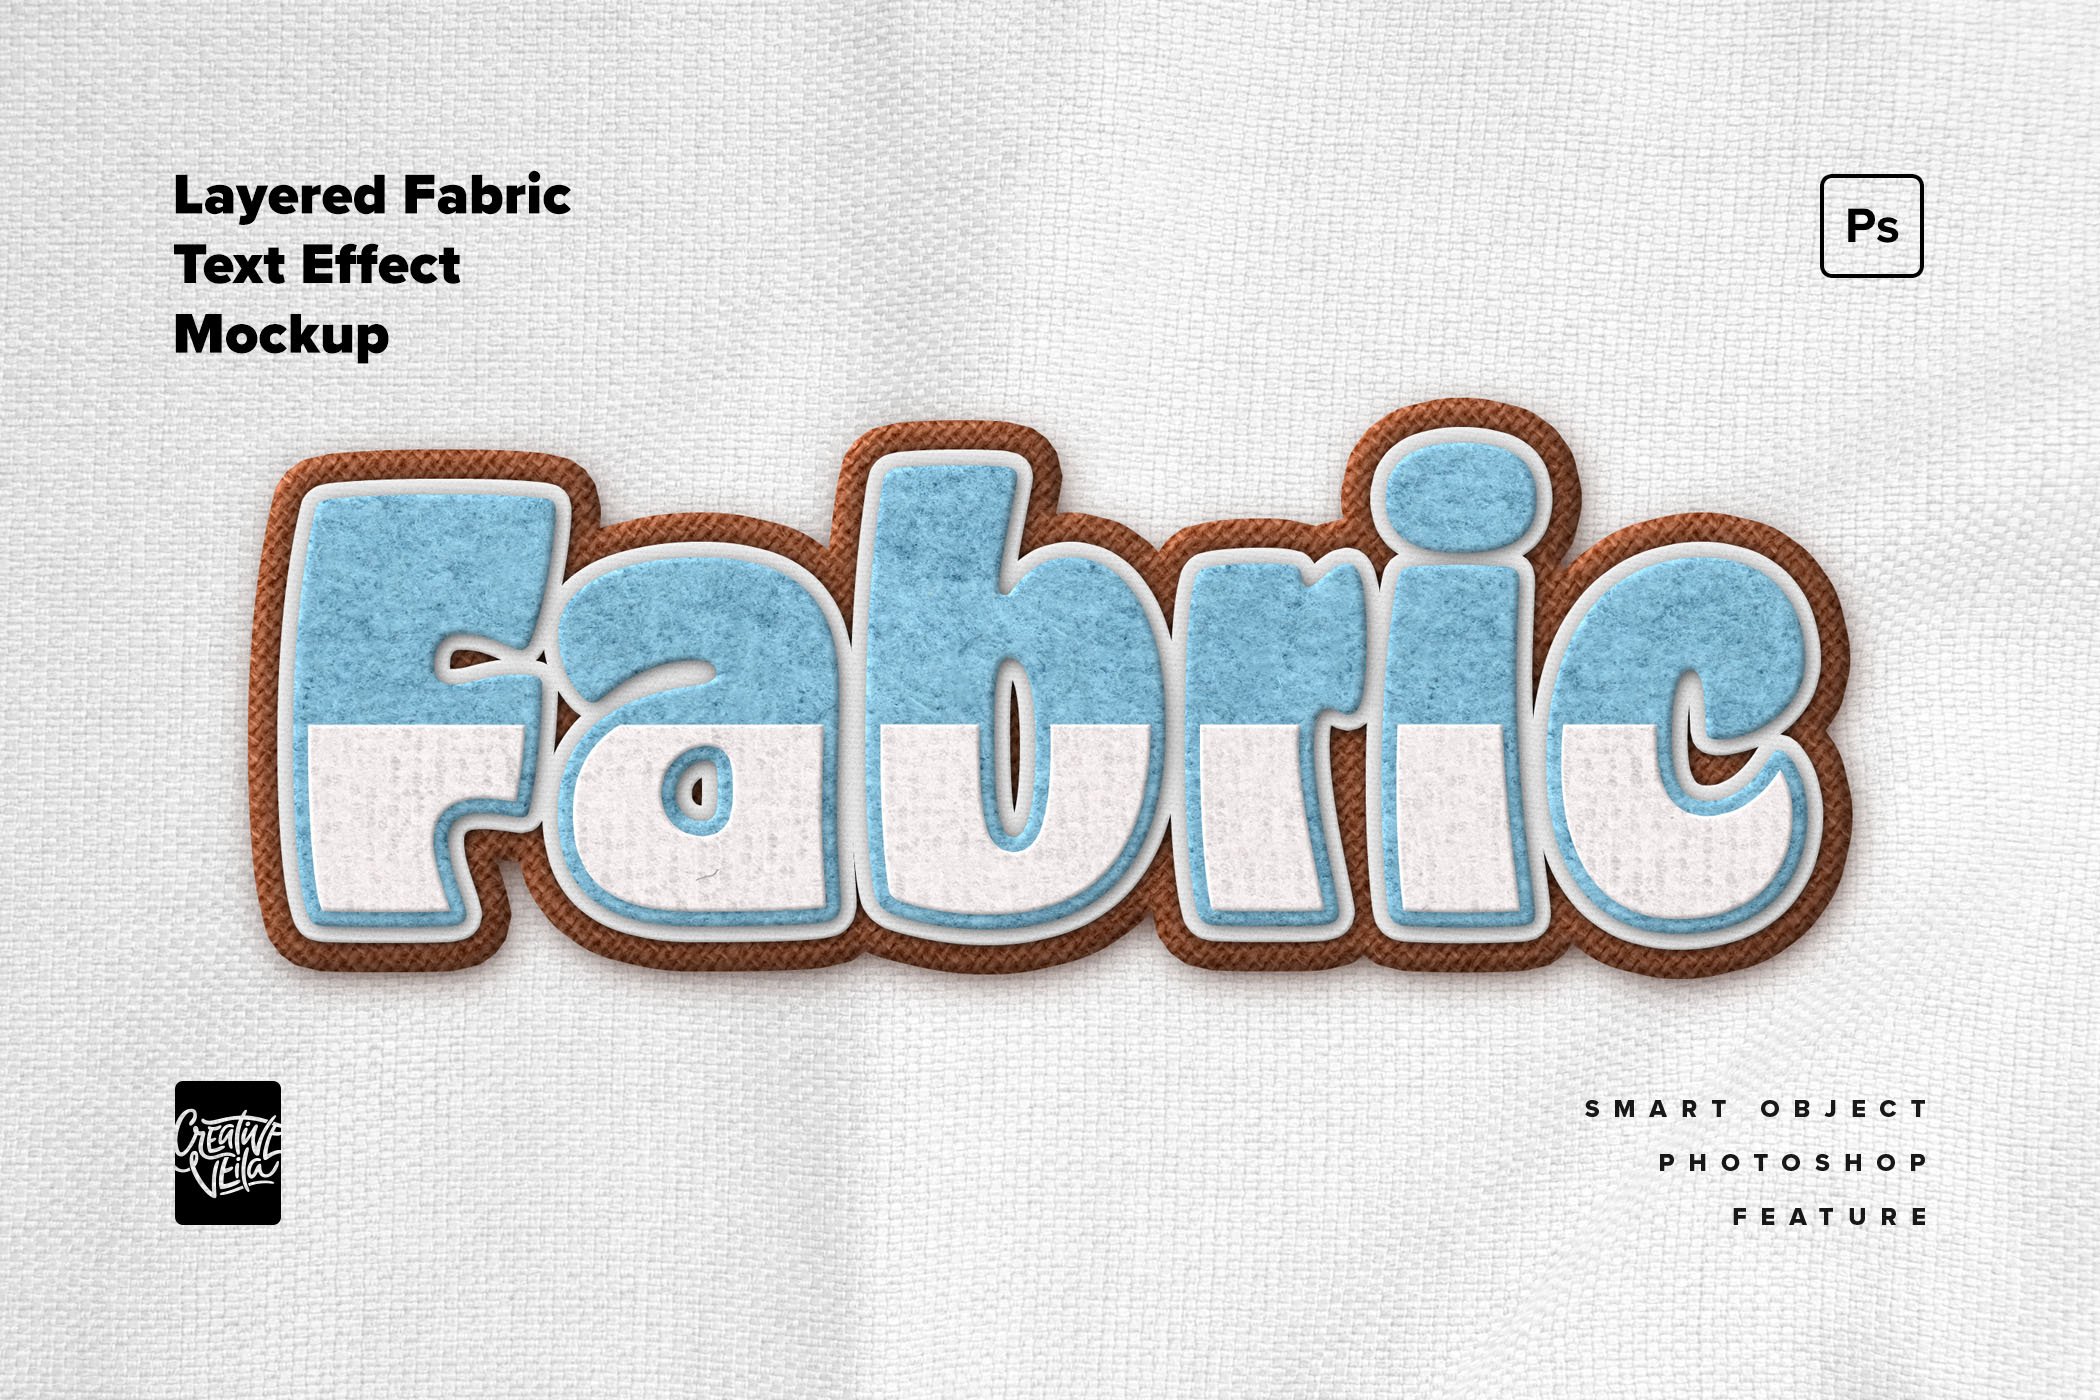 Layered Fabric Text Effect Mockupcover image.